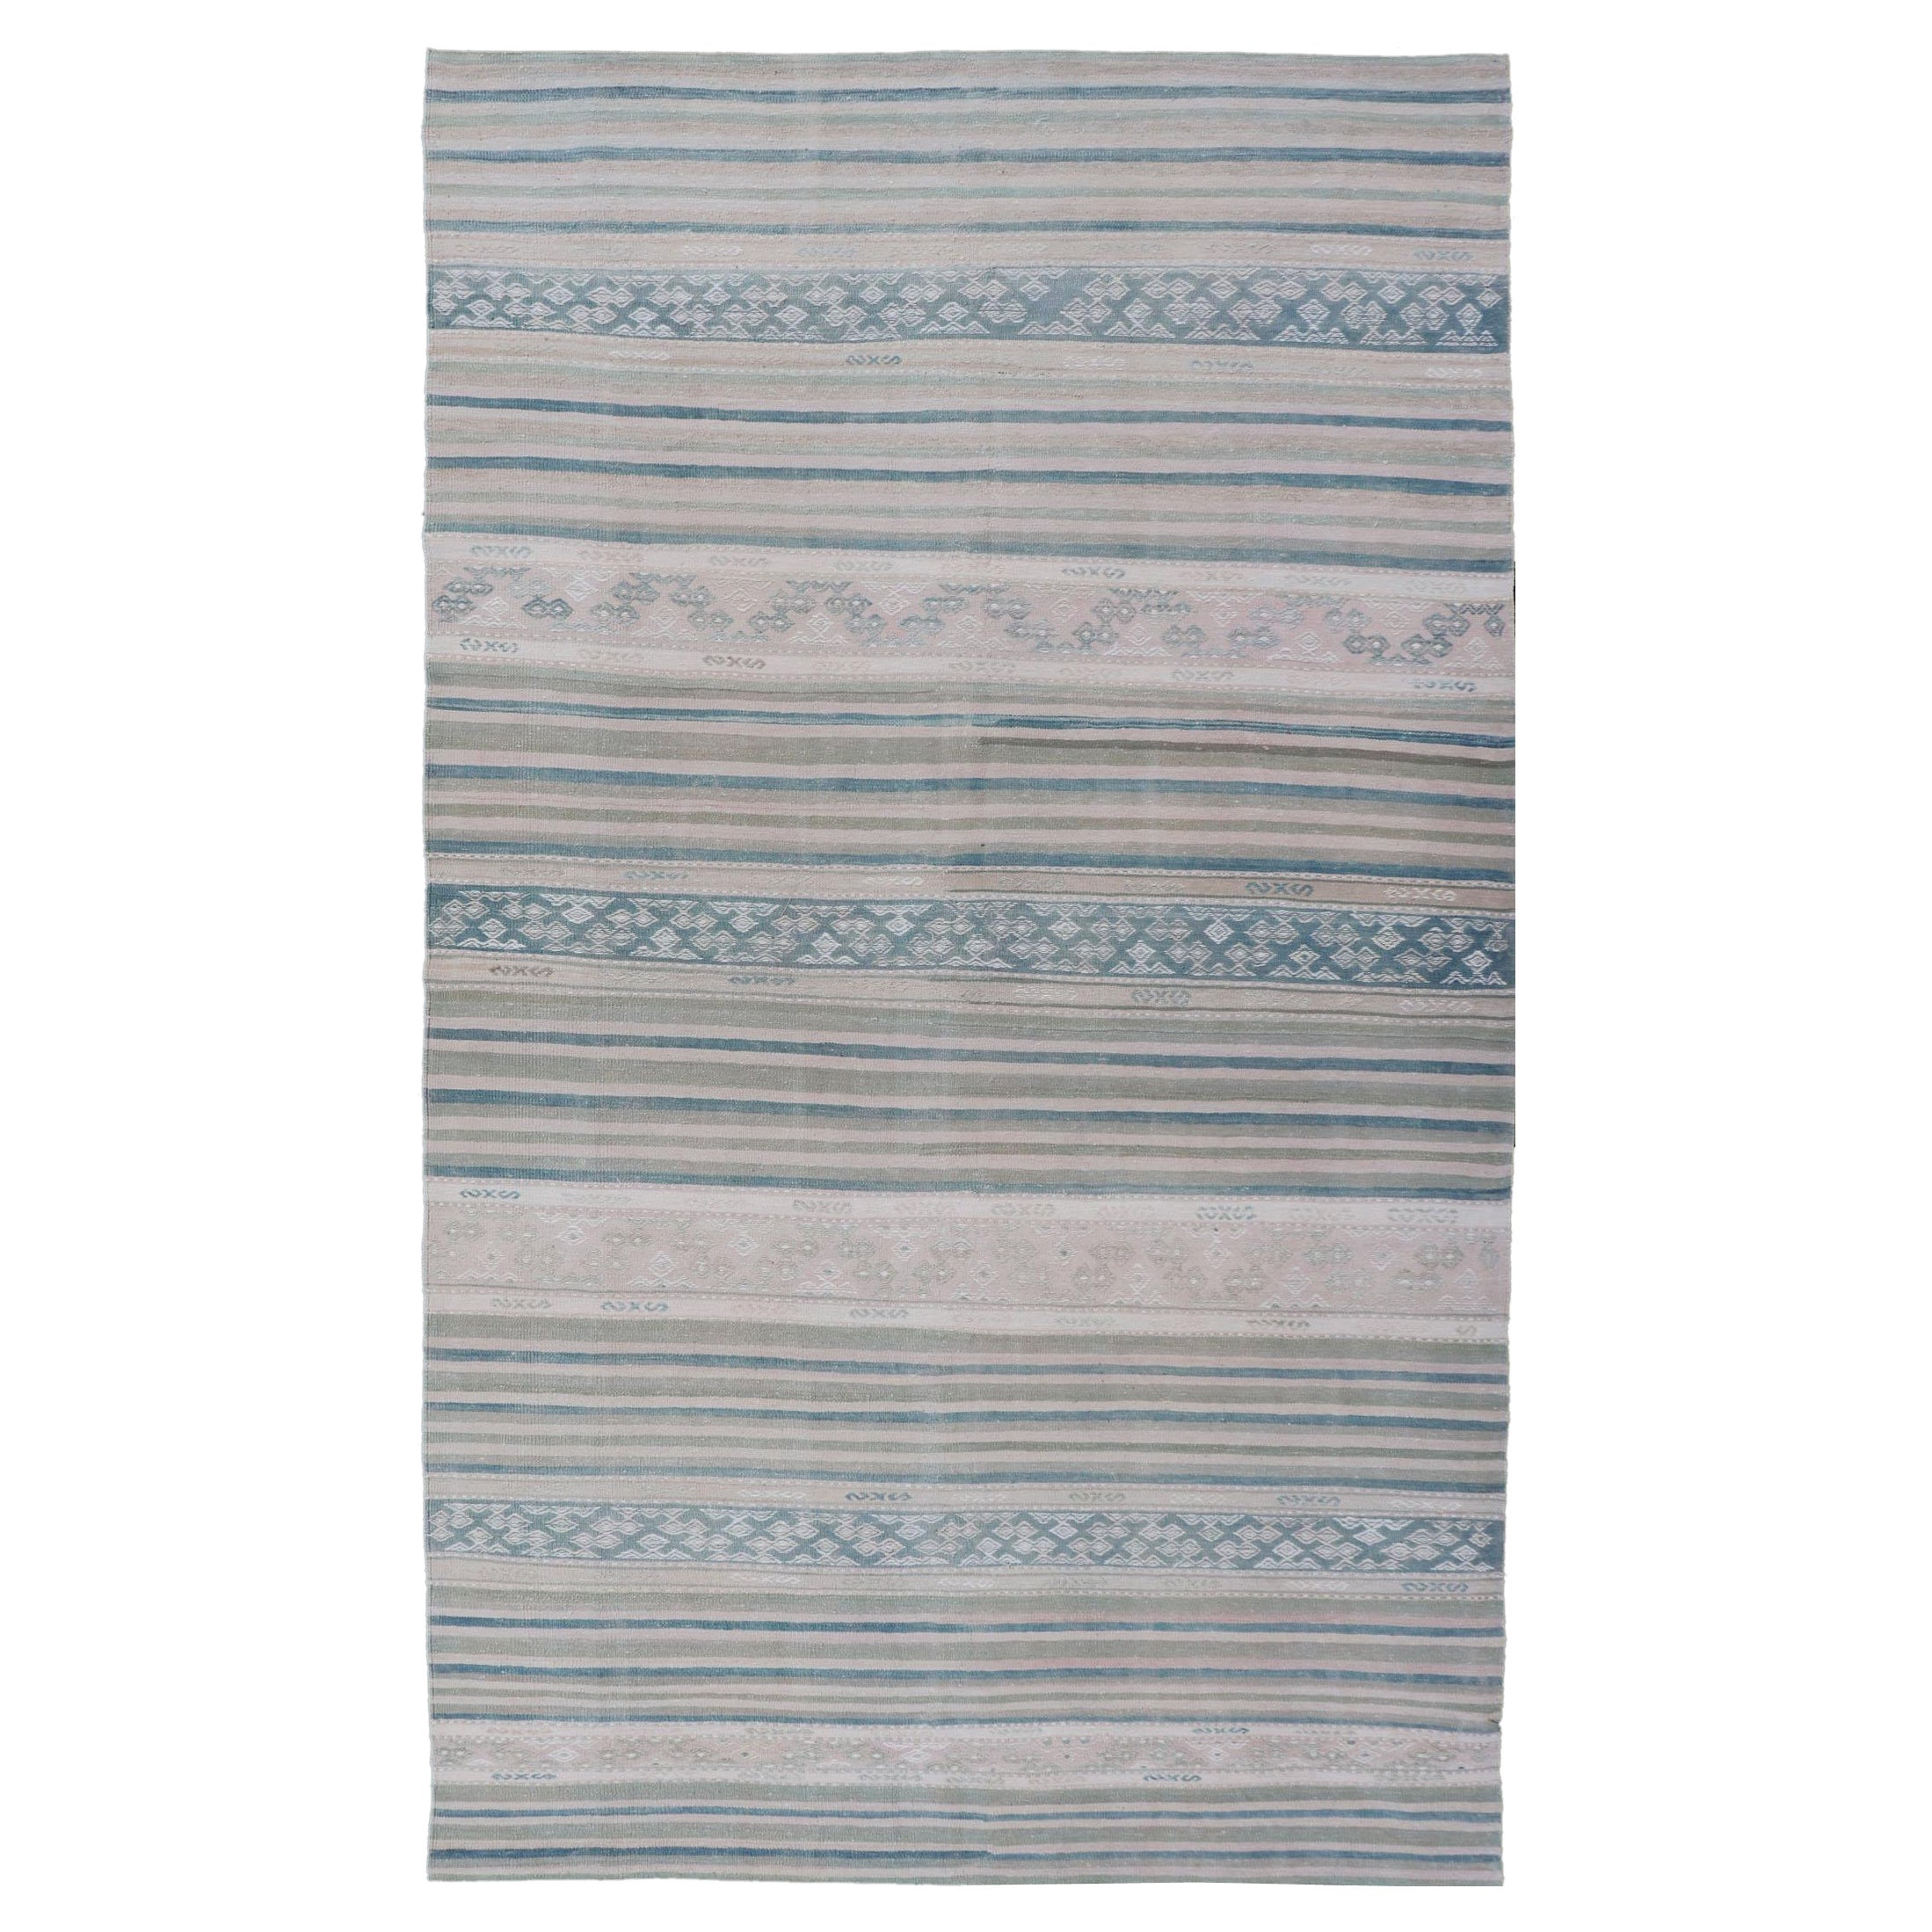 Vintage Flat-Weave Kilim with Embroideries in Blush, Green, Blue and Gray